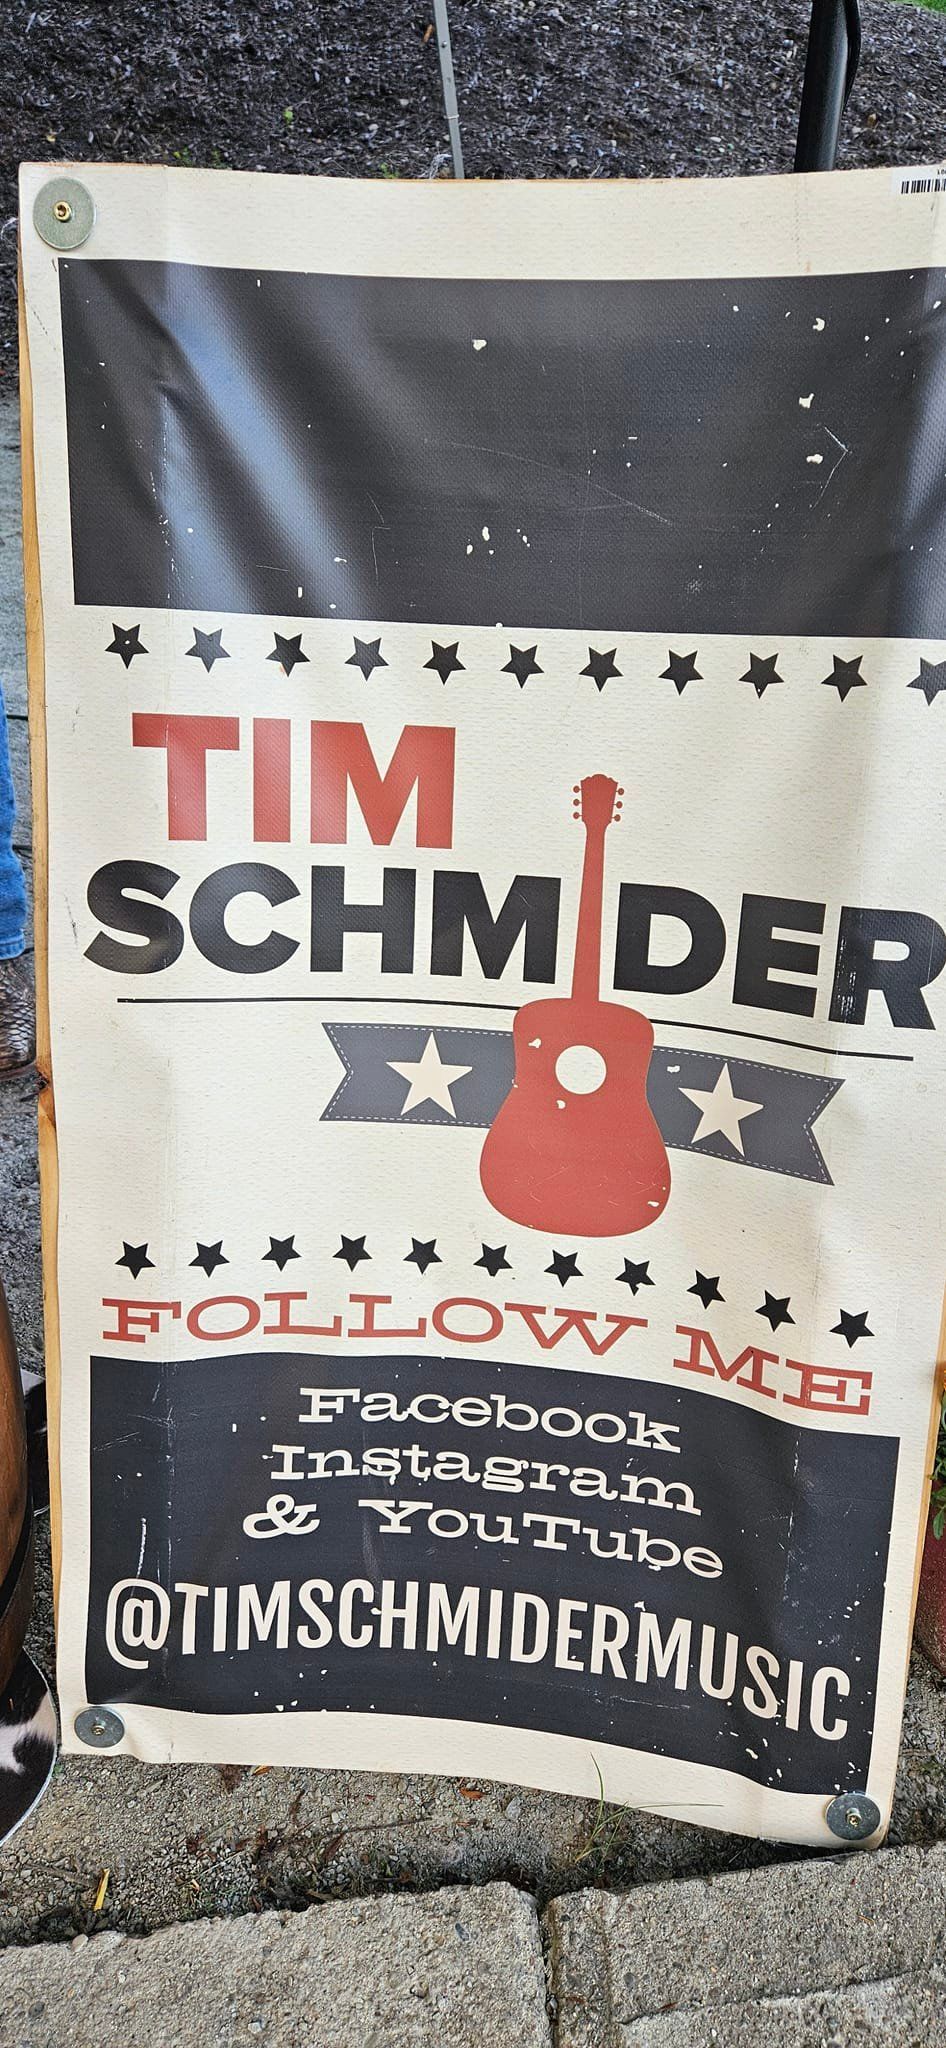 Tim Schmider plays LIVE at Red Barn Winery at a SPECIAL SATURDAY afternoon show  2-5pm